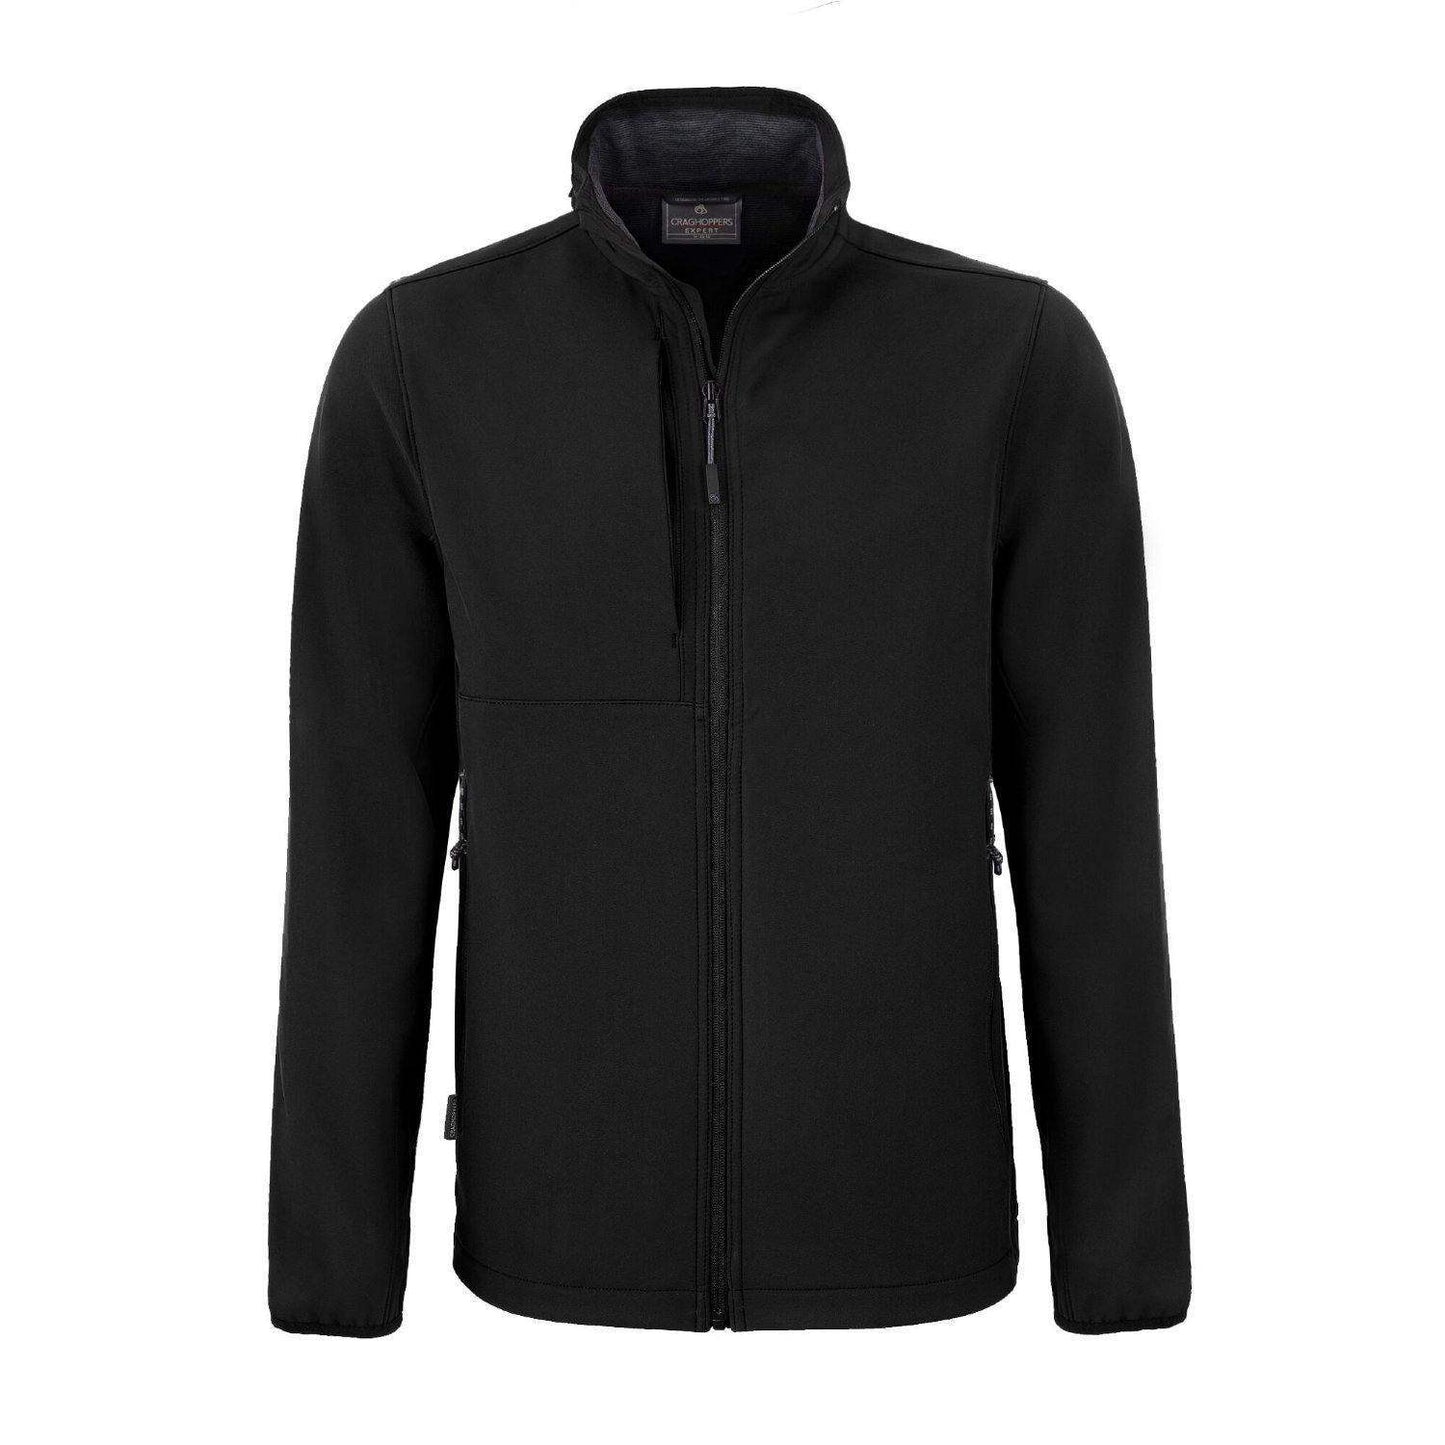 Men's Expert Basecamp Softshell Jacket by Craghoppers - The Luxury Promotional Gifts Company Limited